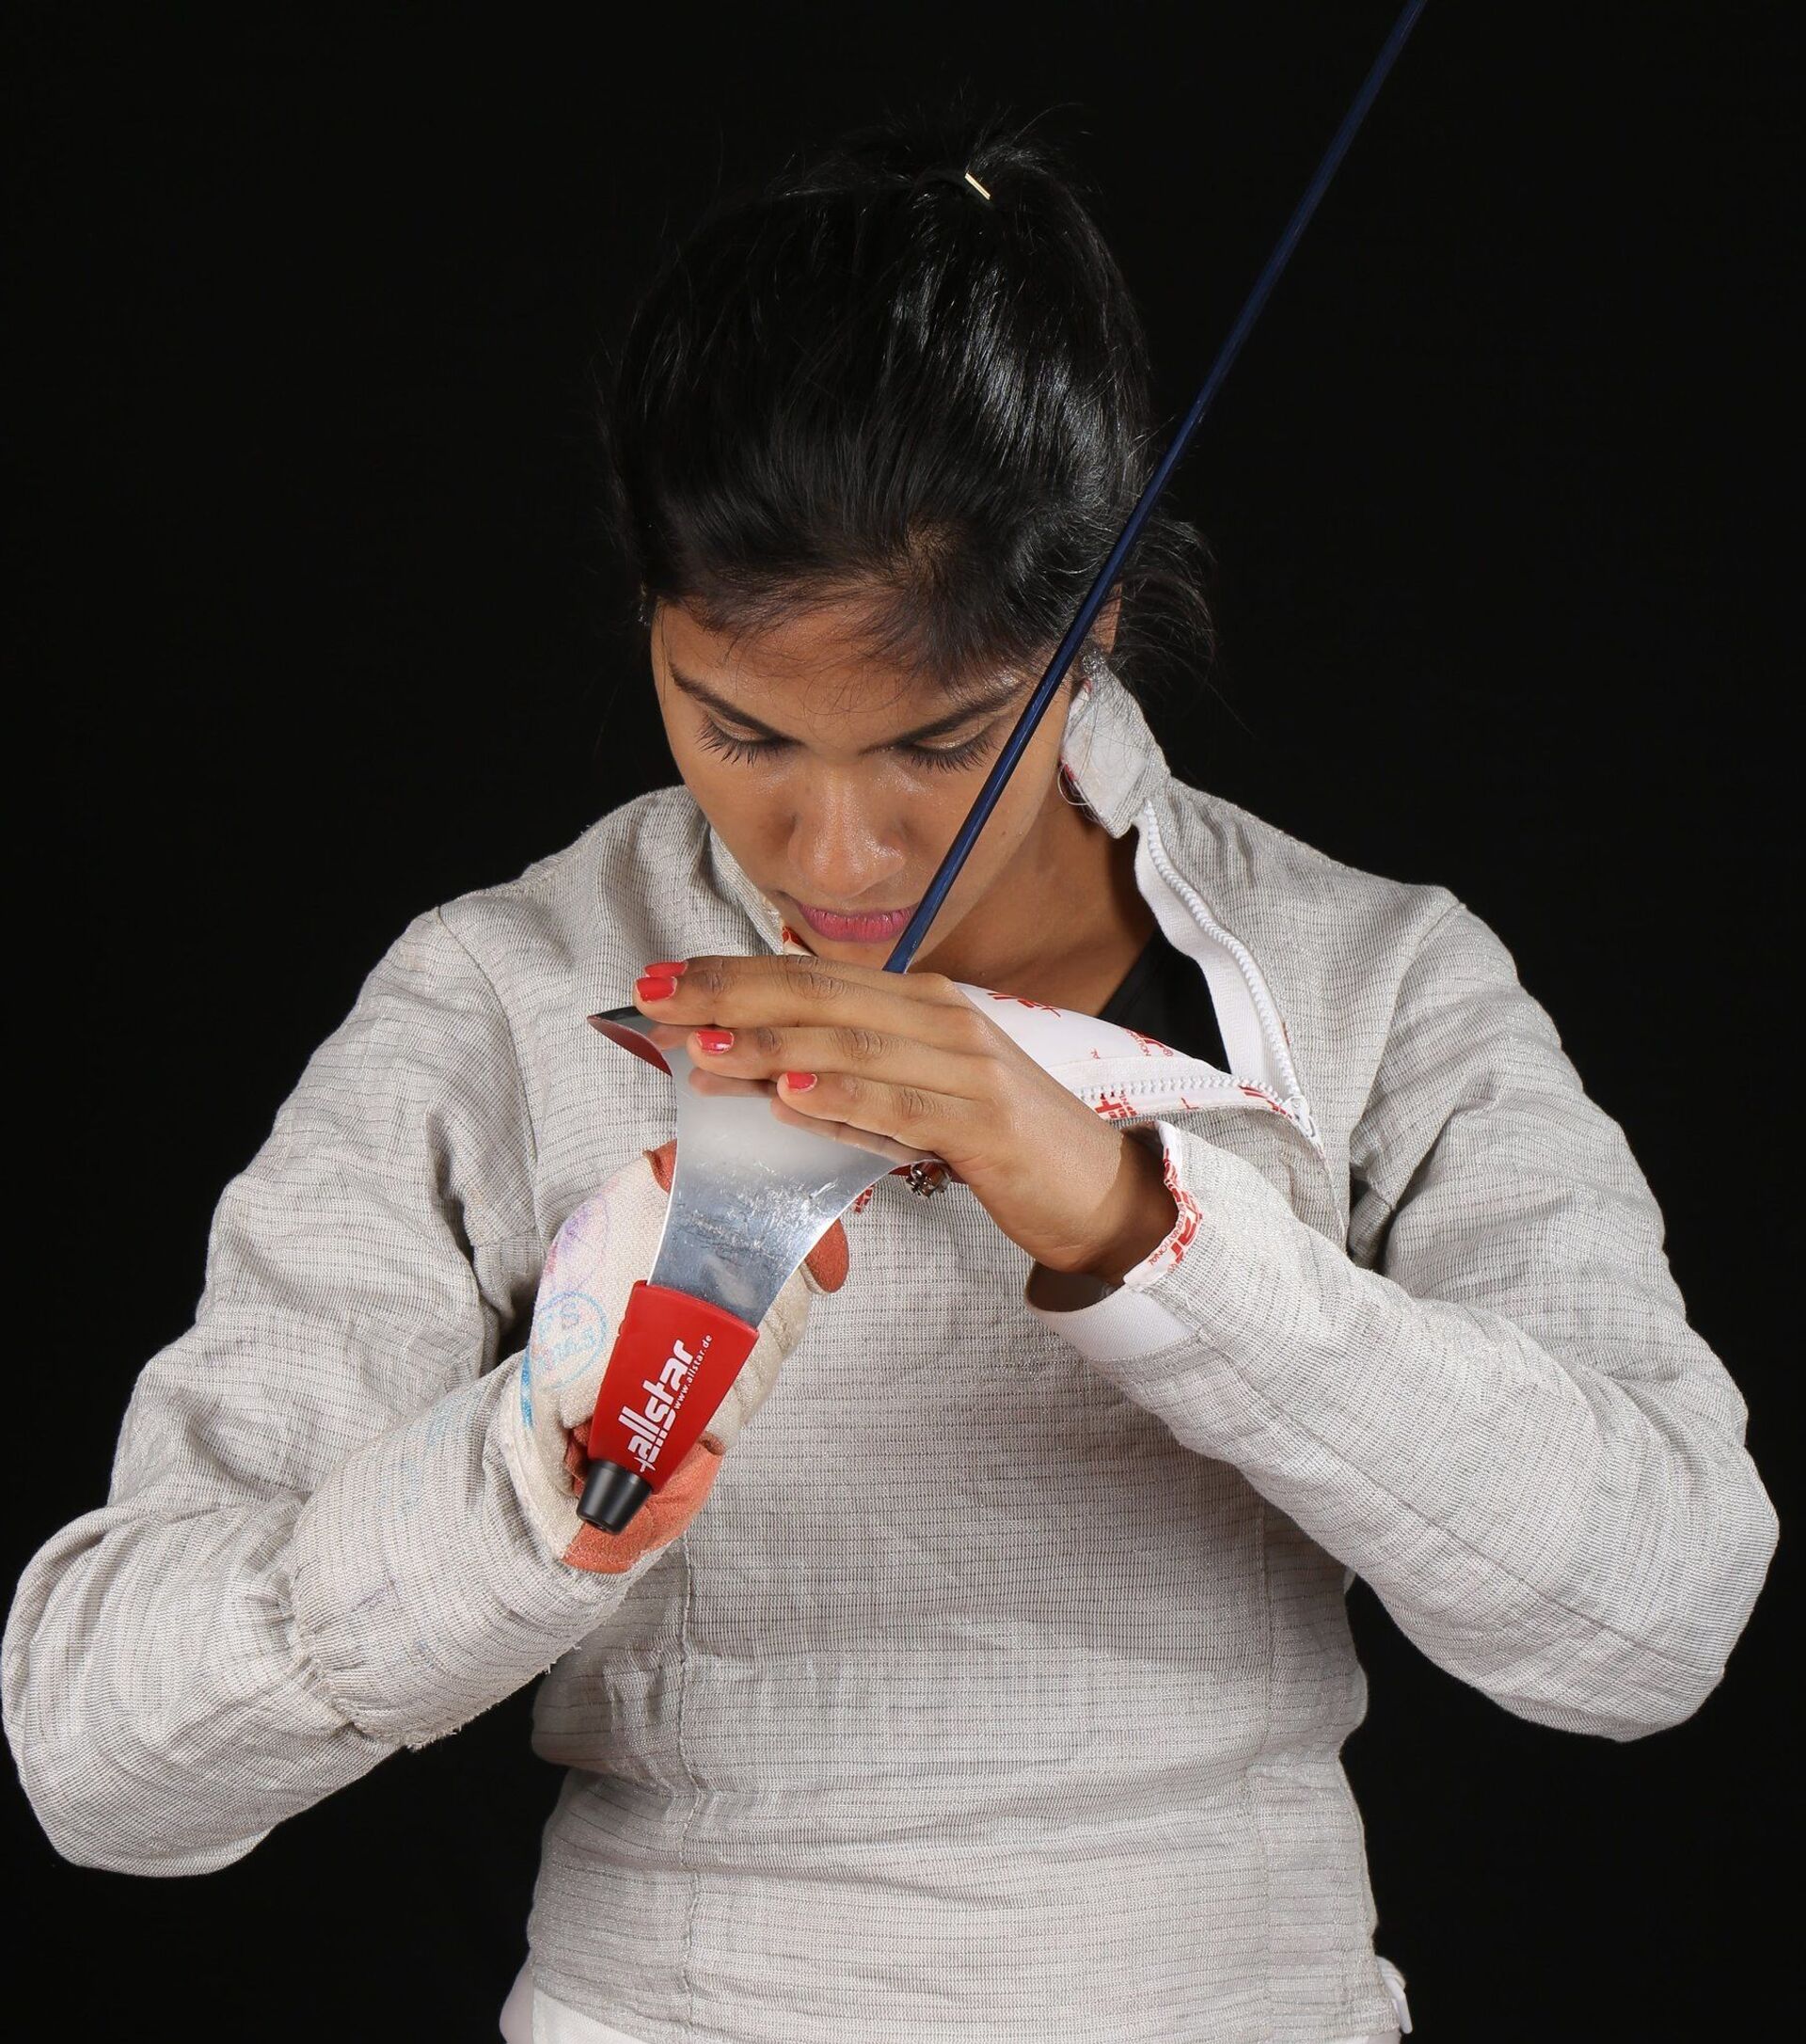 An Olympic Medal in Tokyo Could Prove to Be Defining Moment for Fencing in India, Bhavani Devi Says - Sputnik International, 1920, 05.04.2021